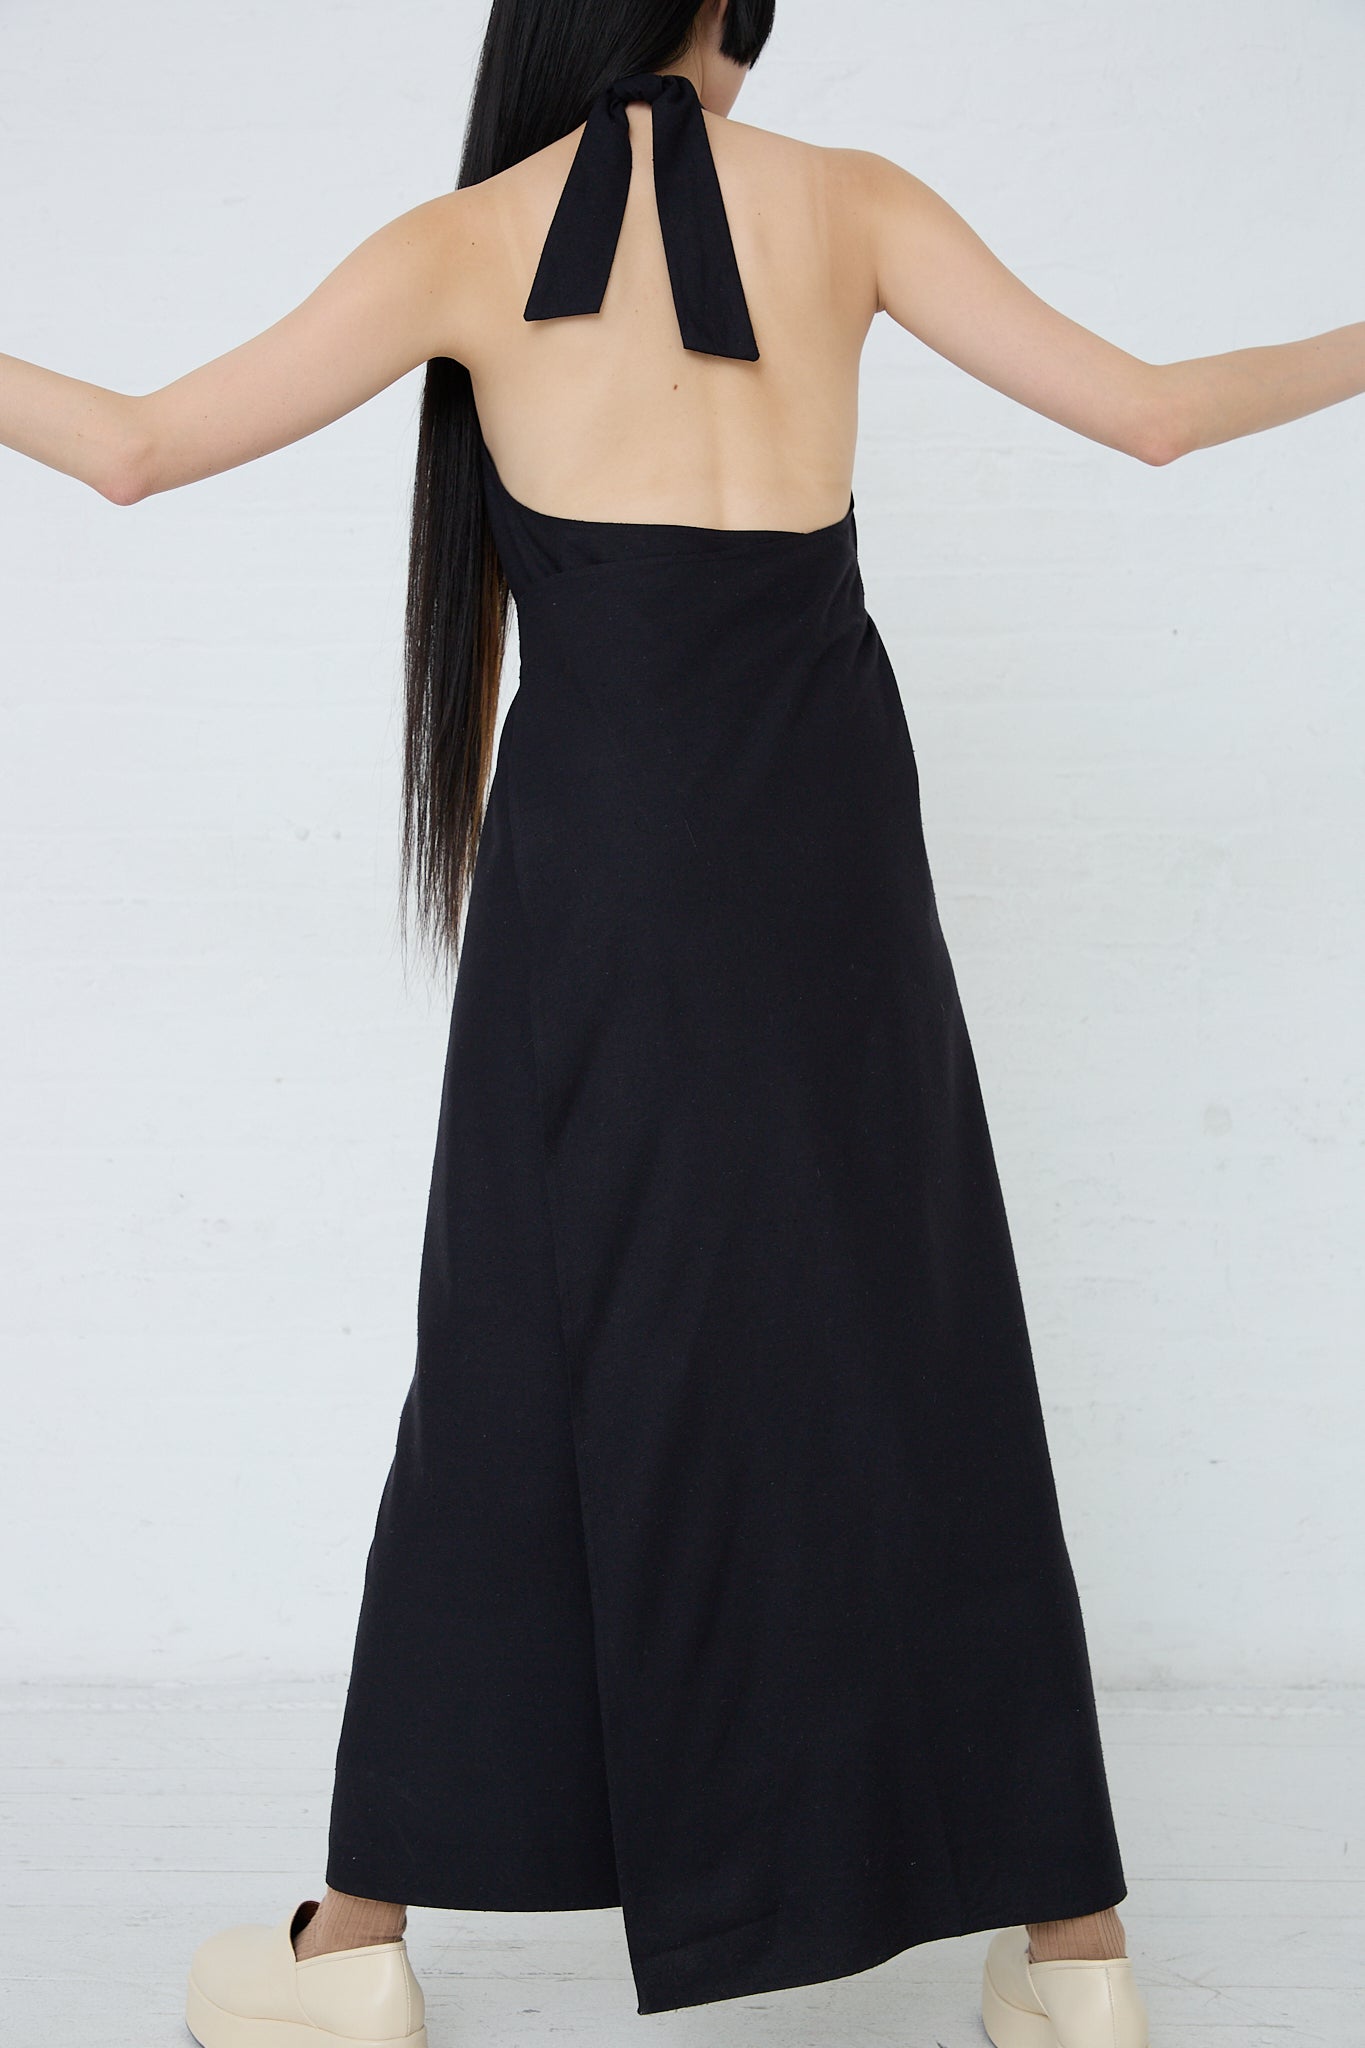 The back view of a woman in a Wild Silk Trope Apron Dress in Black with her arms outstretched.